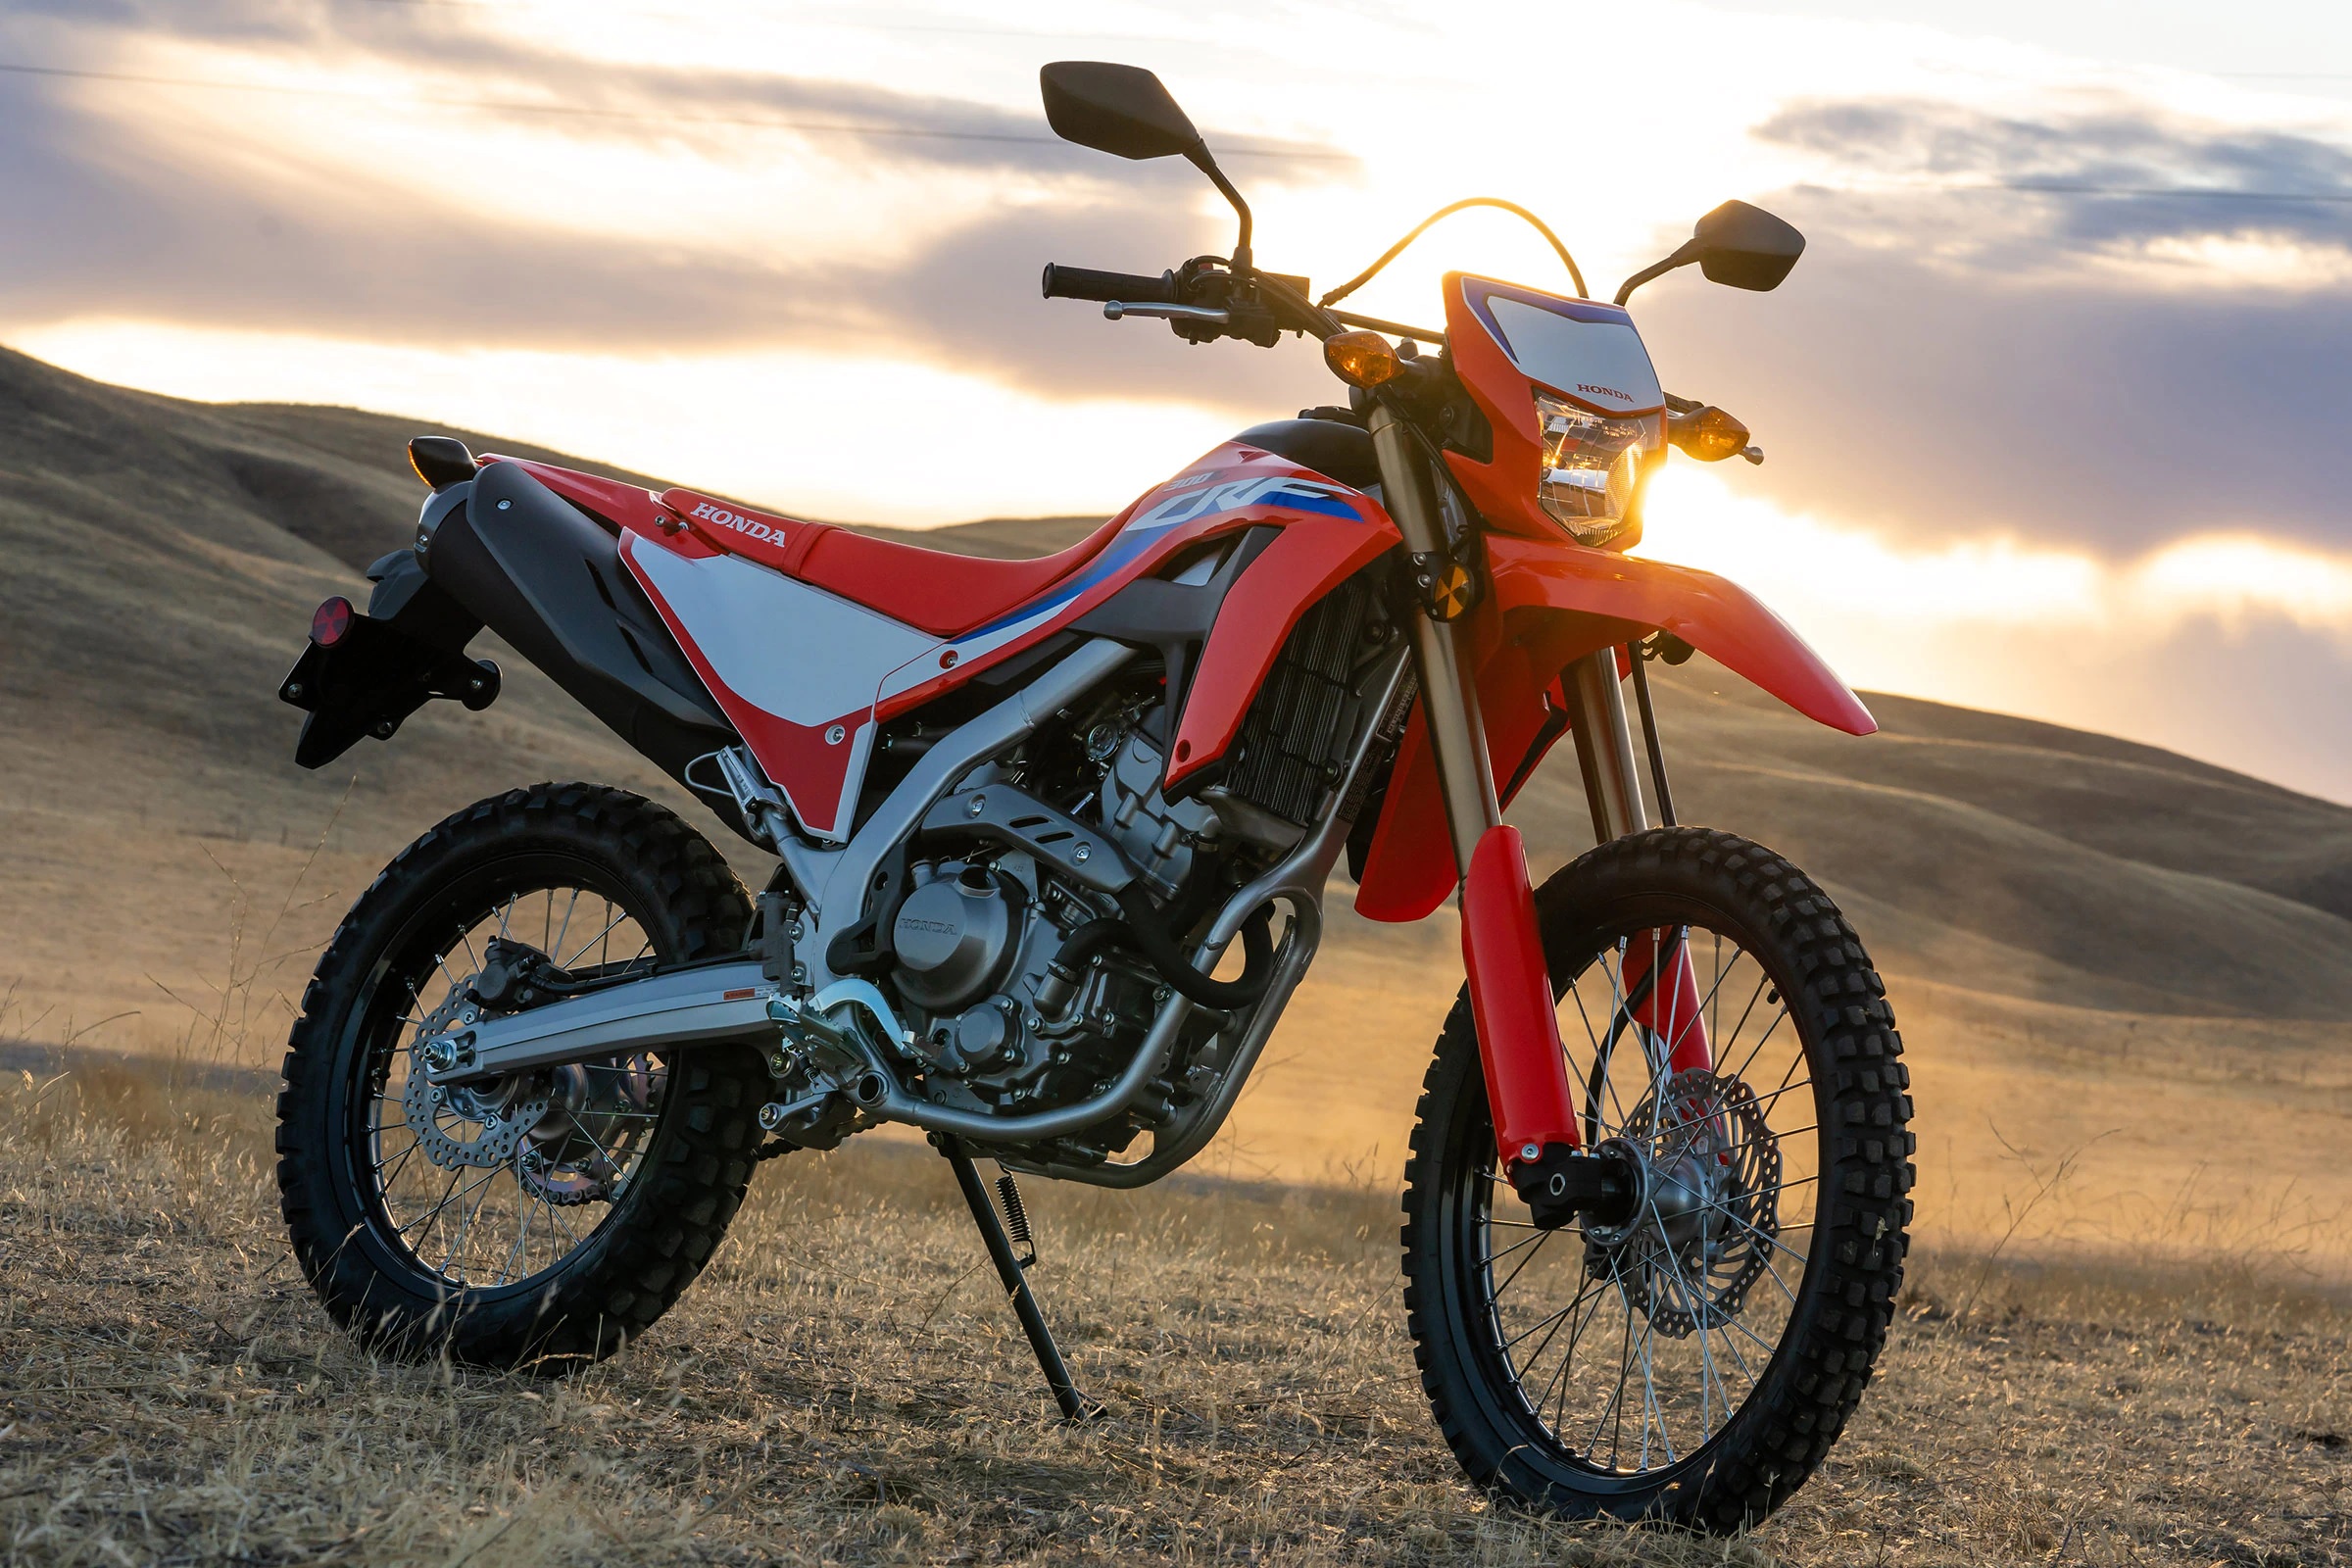 A red-and-white 2021 Honda CRF300L dual-sport motorcycle amongst desert plains